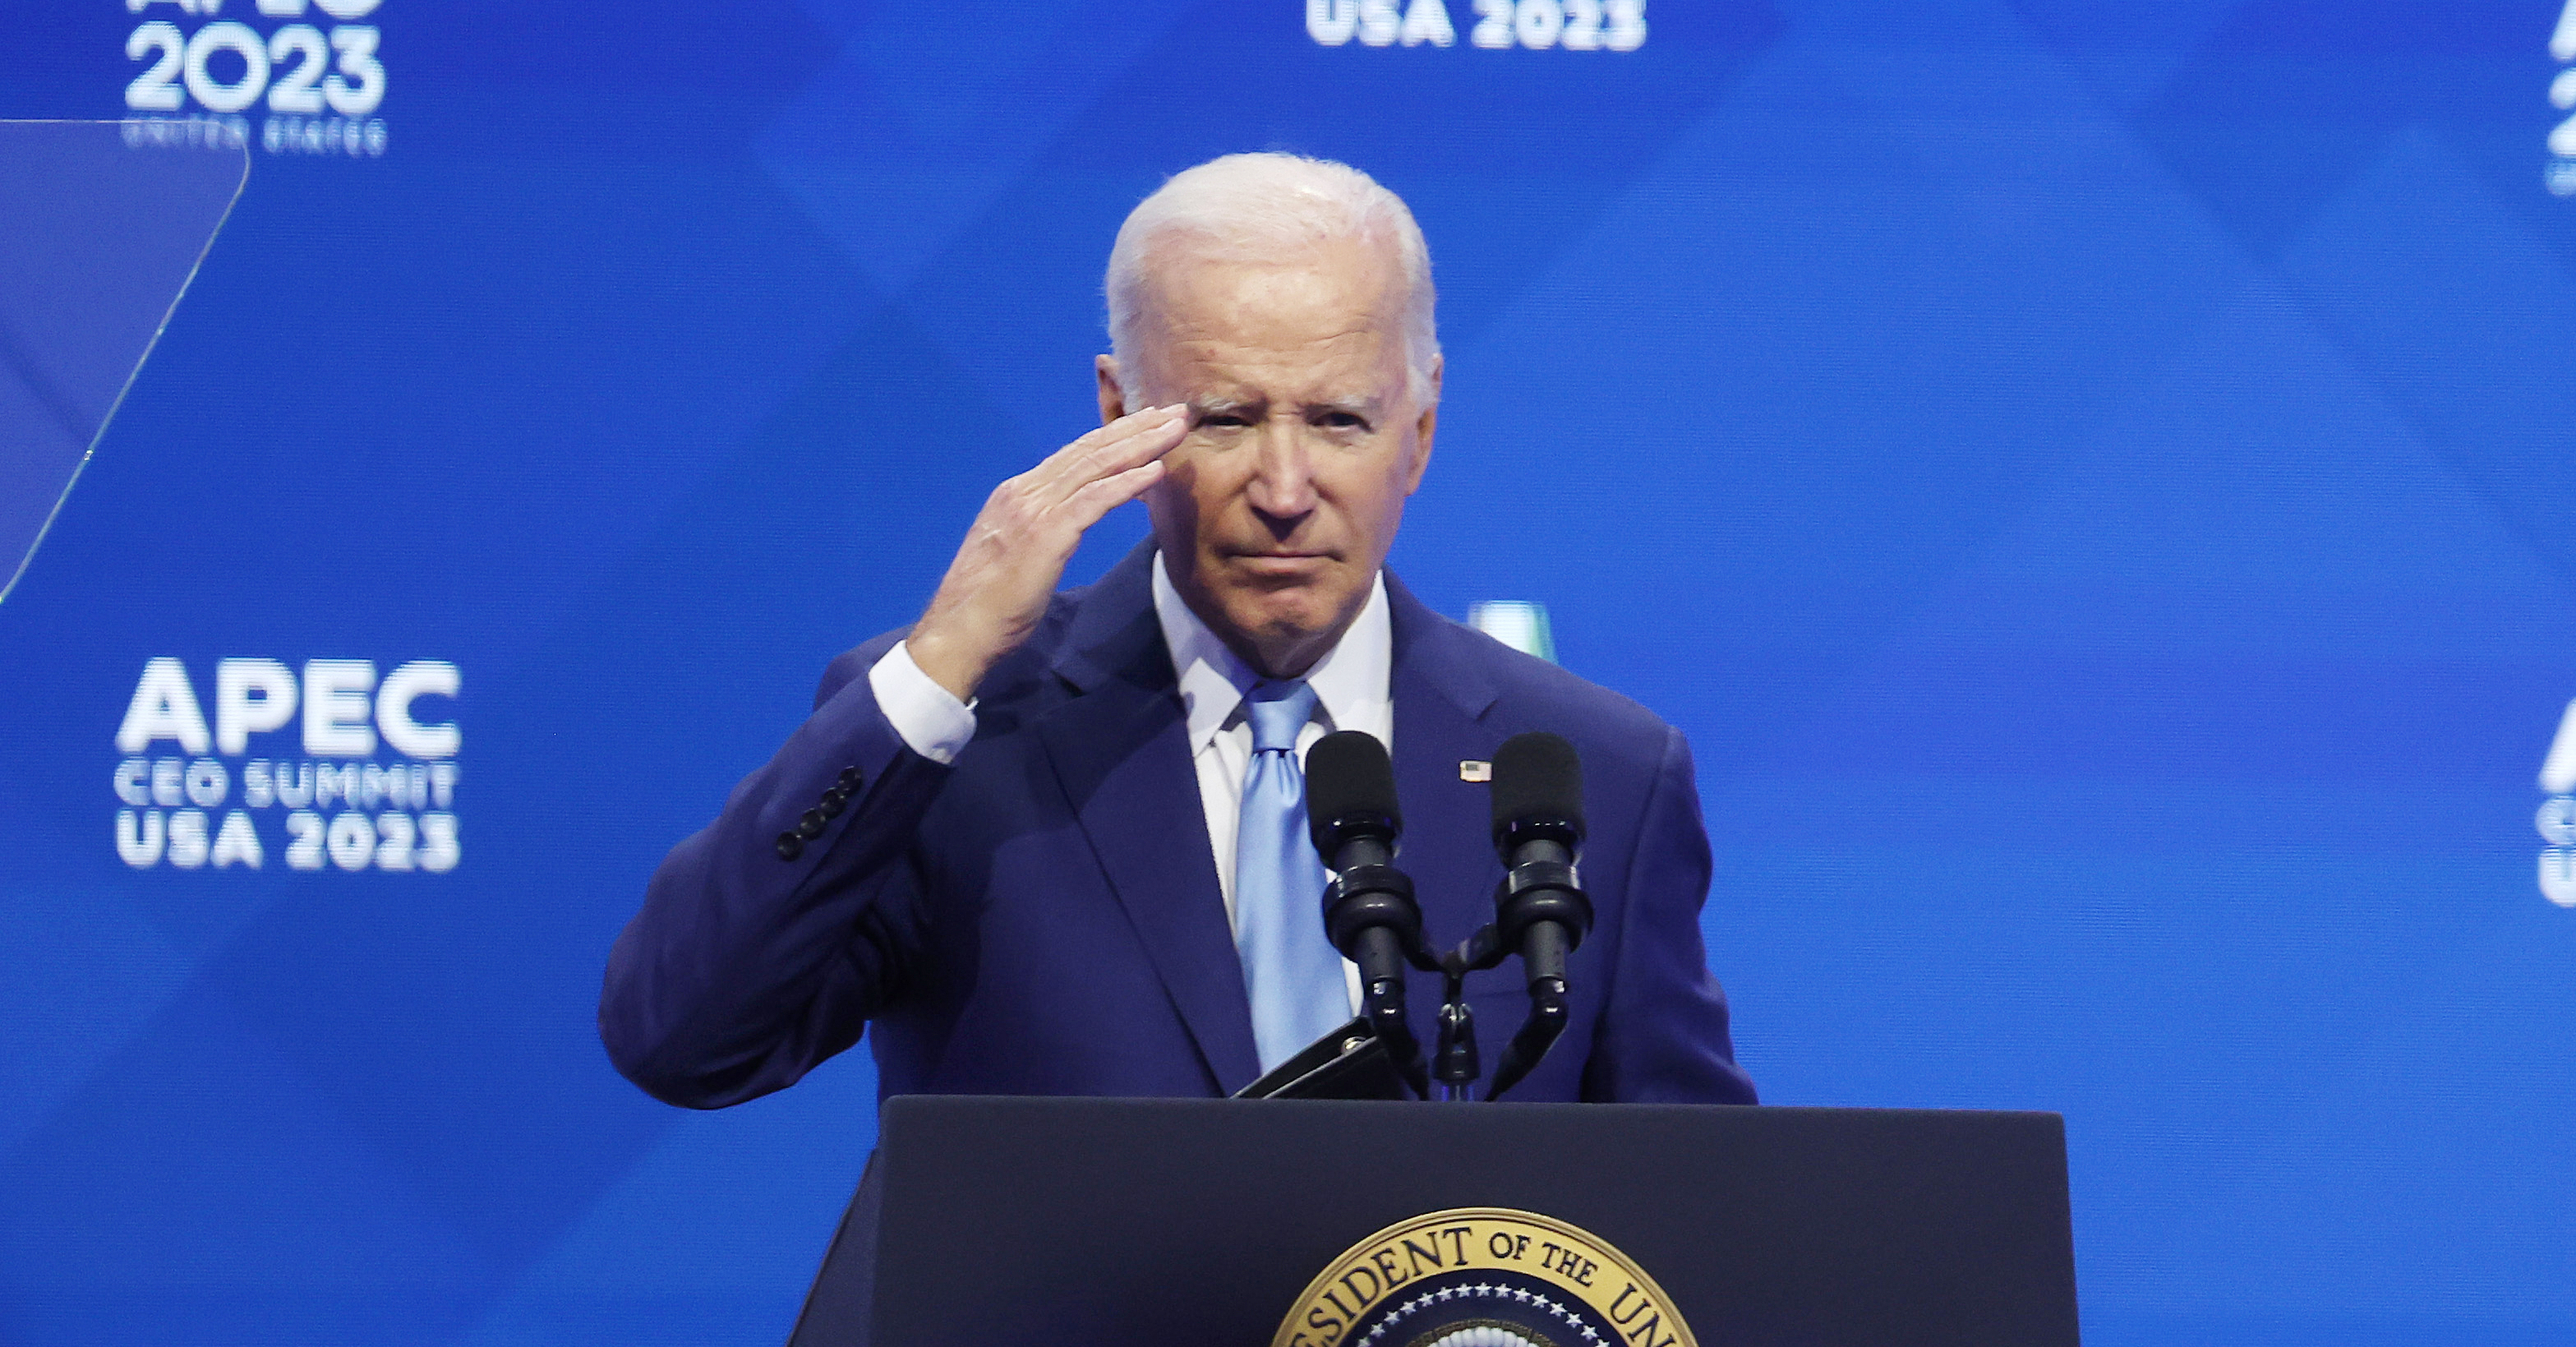 U.S. President Joe Biden stands behind a lectern saluting with a blue backdrop in the background that reads: APEC CEO SUMMIT USA 2023